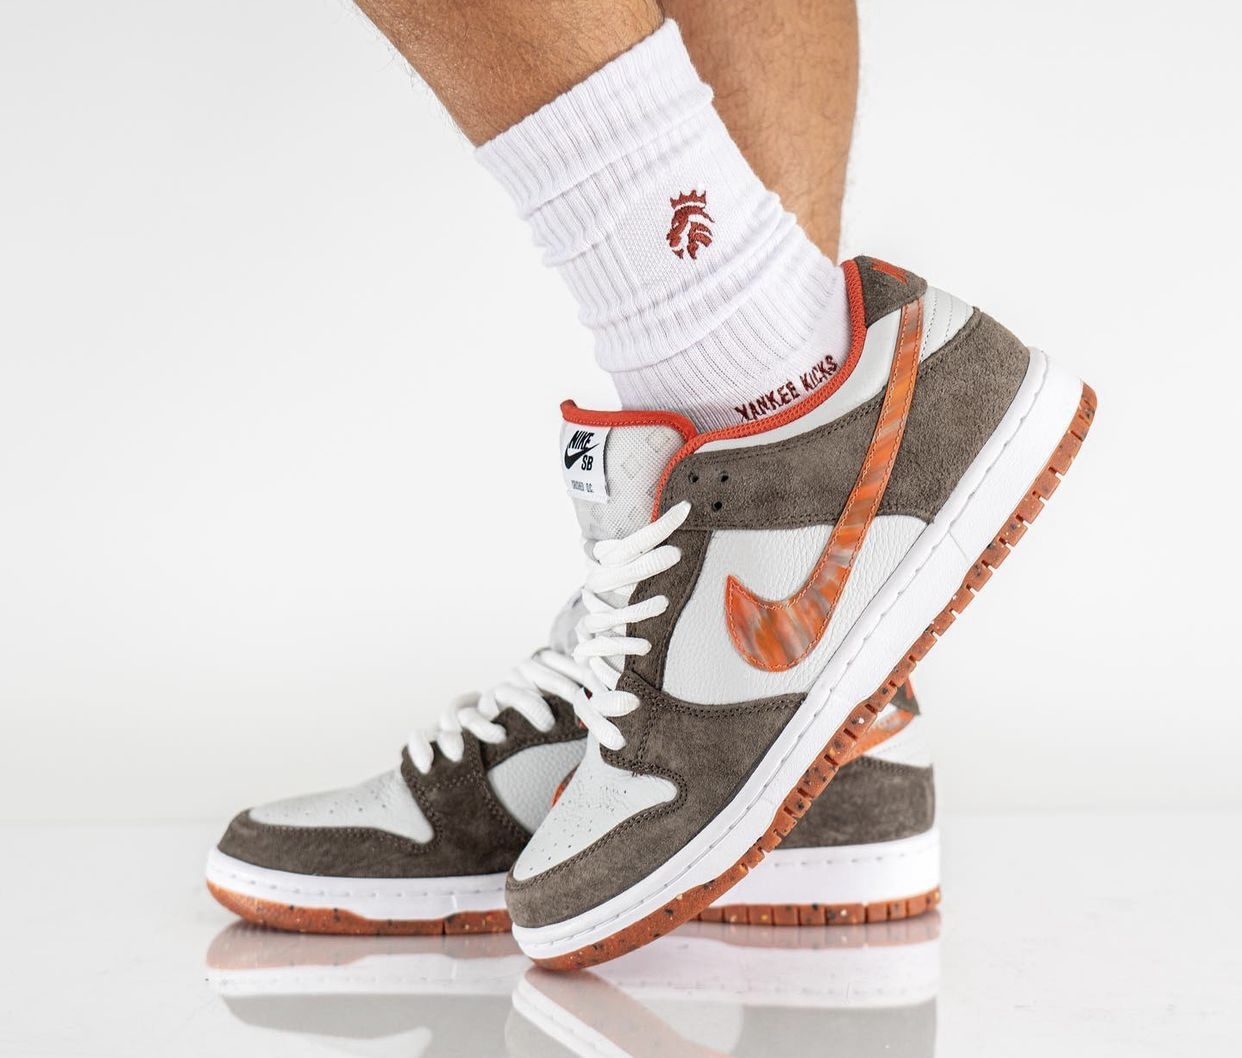 Crushed DC nike running SB Dunk Low DH7782 001 Release Date On Feet 3